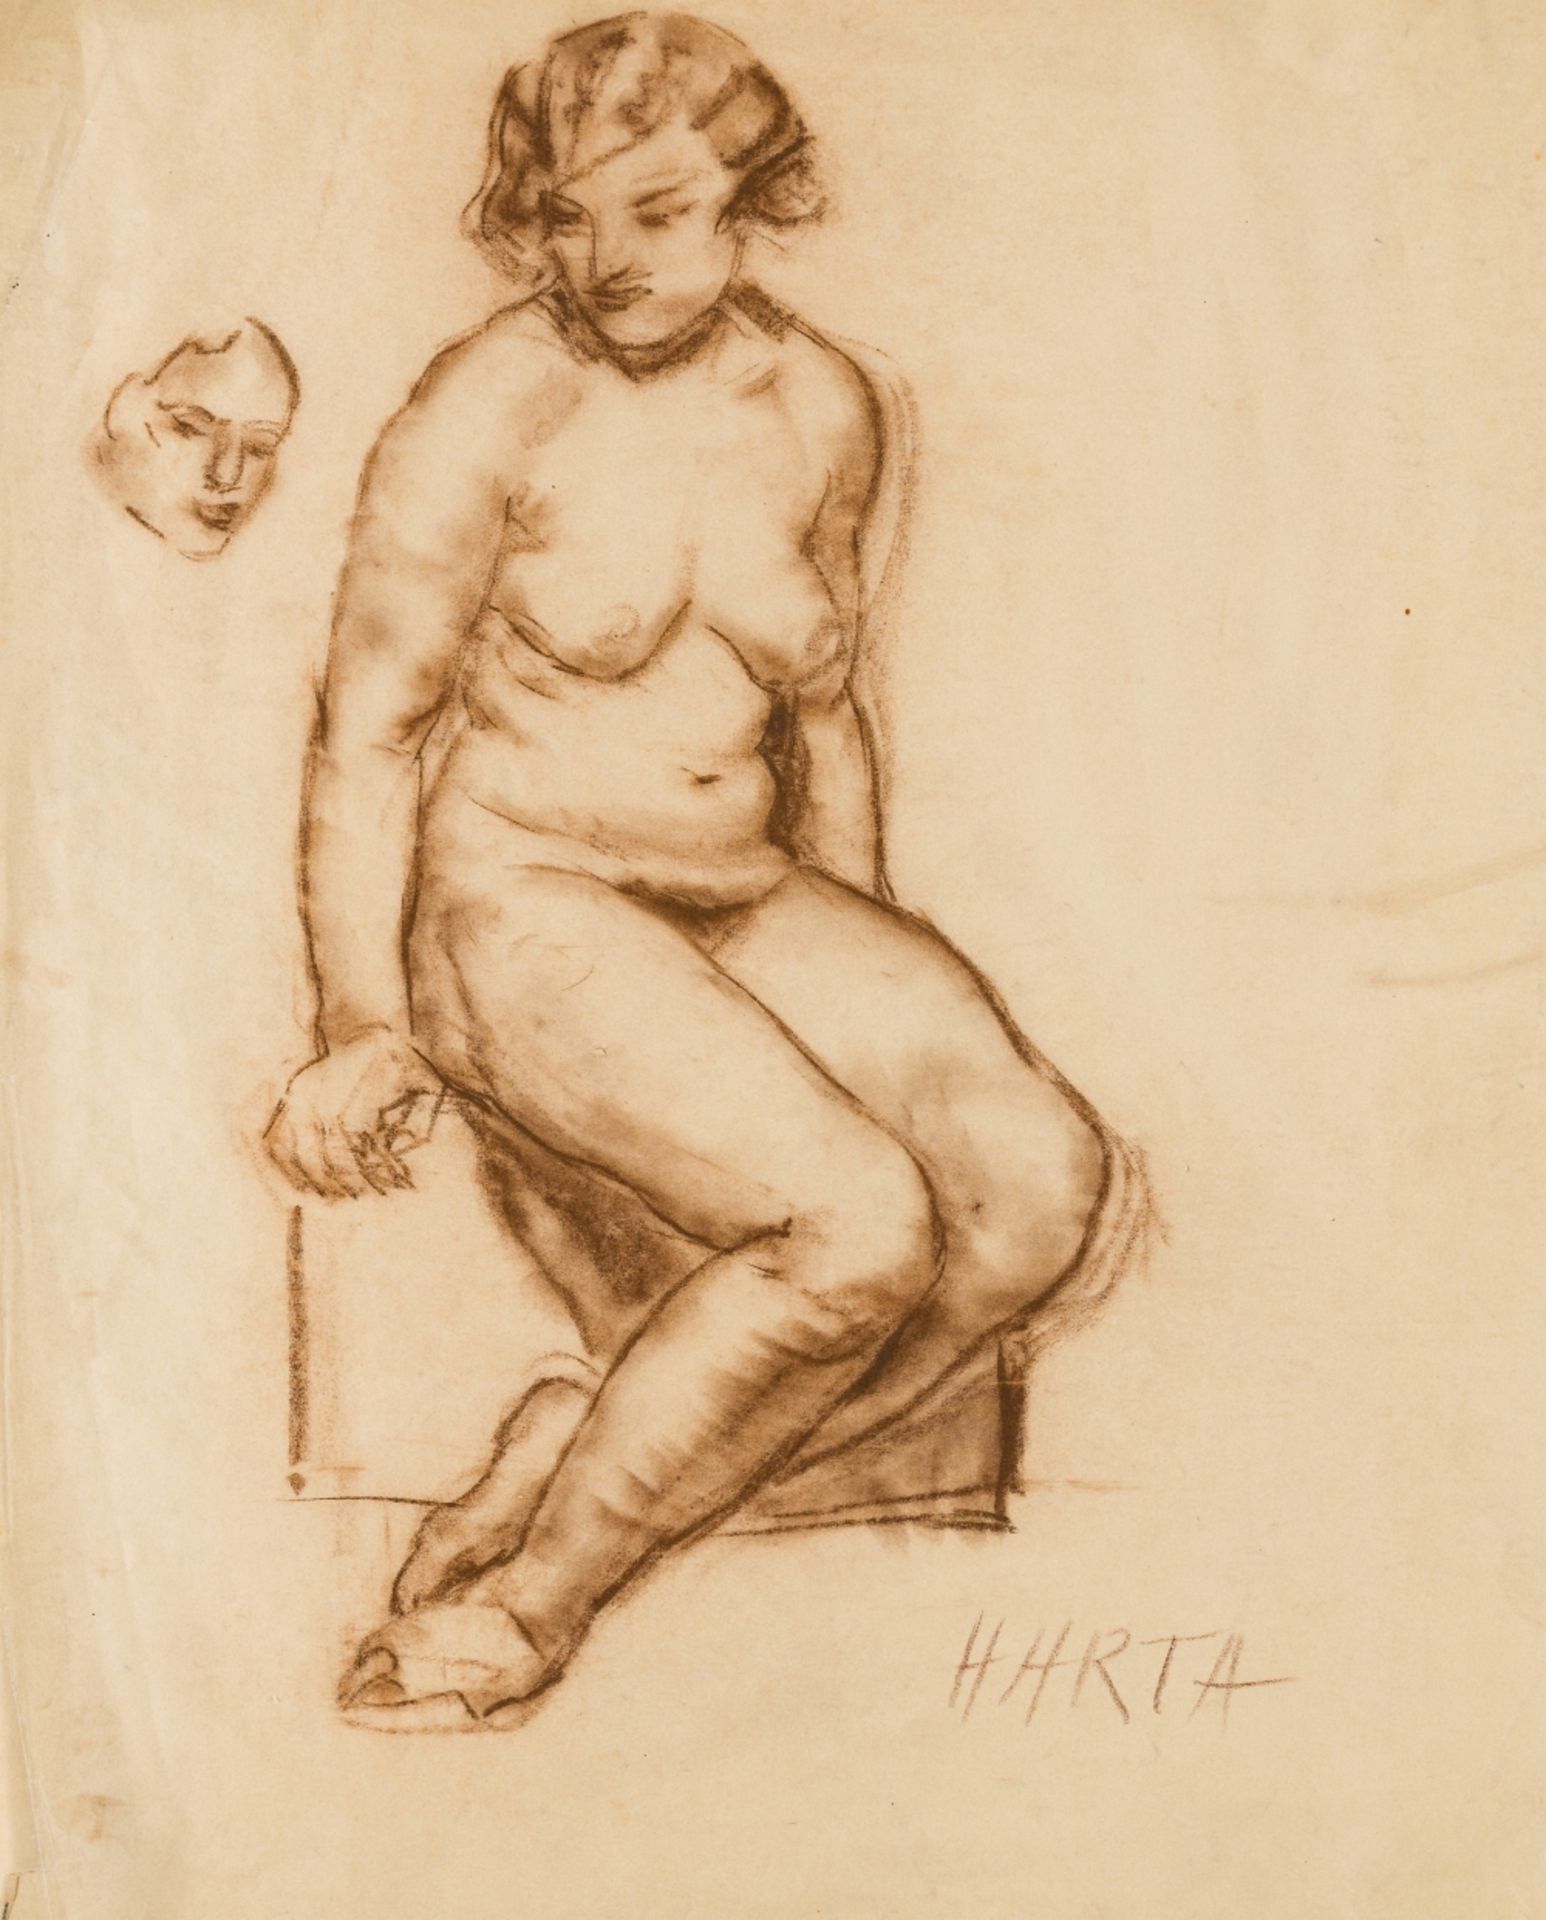 Harta, Felix Albrecht(1884 - 1967)Seated Female NudeBrown Coal on Tissue PaperSigned lower right23,7